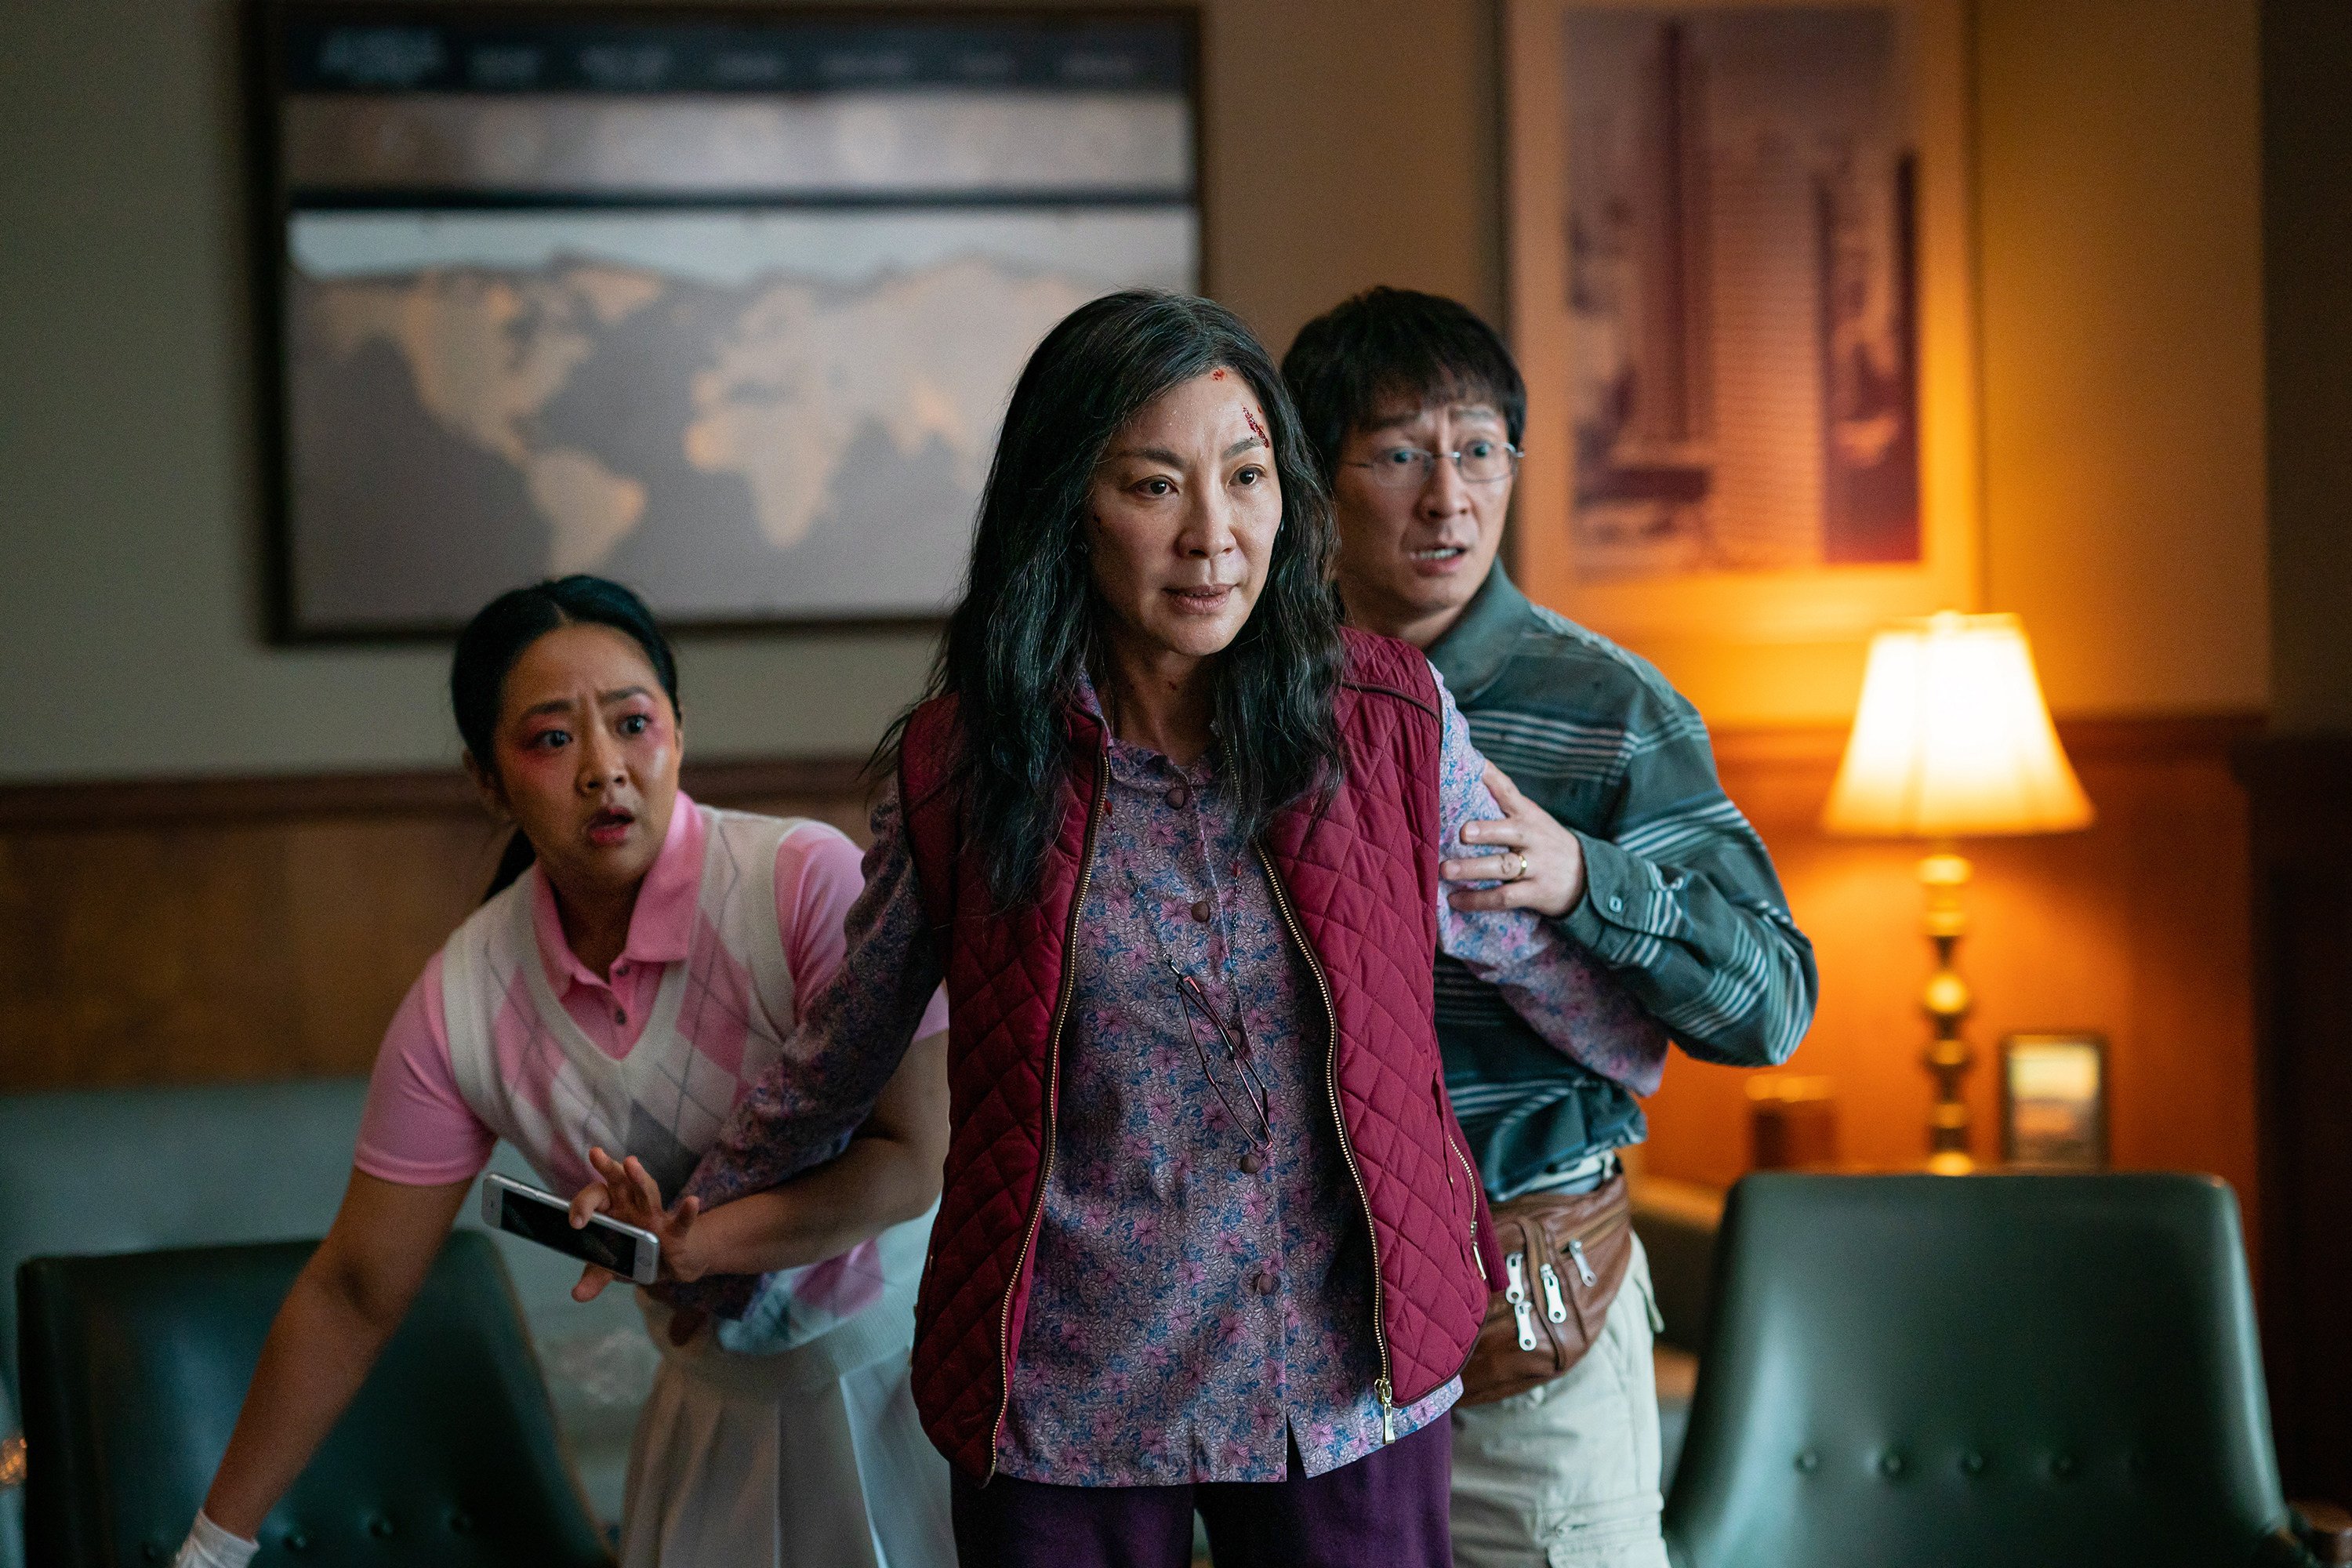 Stephanie Hsu, Michelle Yeoh and Ke Huy Quan in “Everything Everywhere All at Once”. Photo: Via TNS